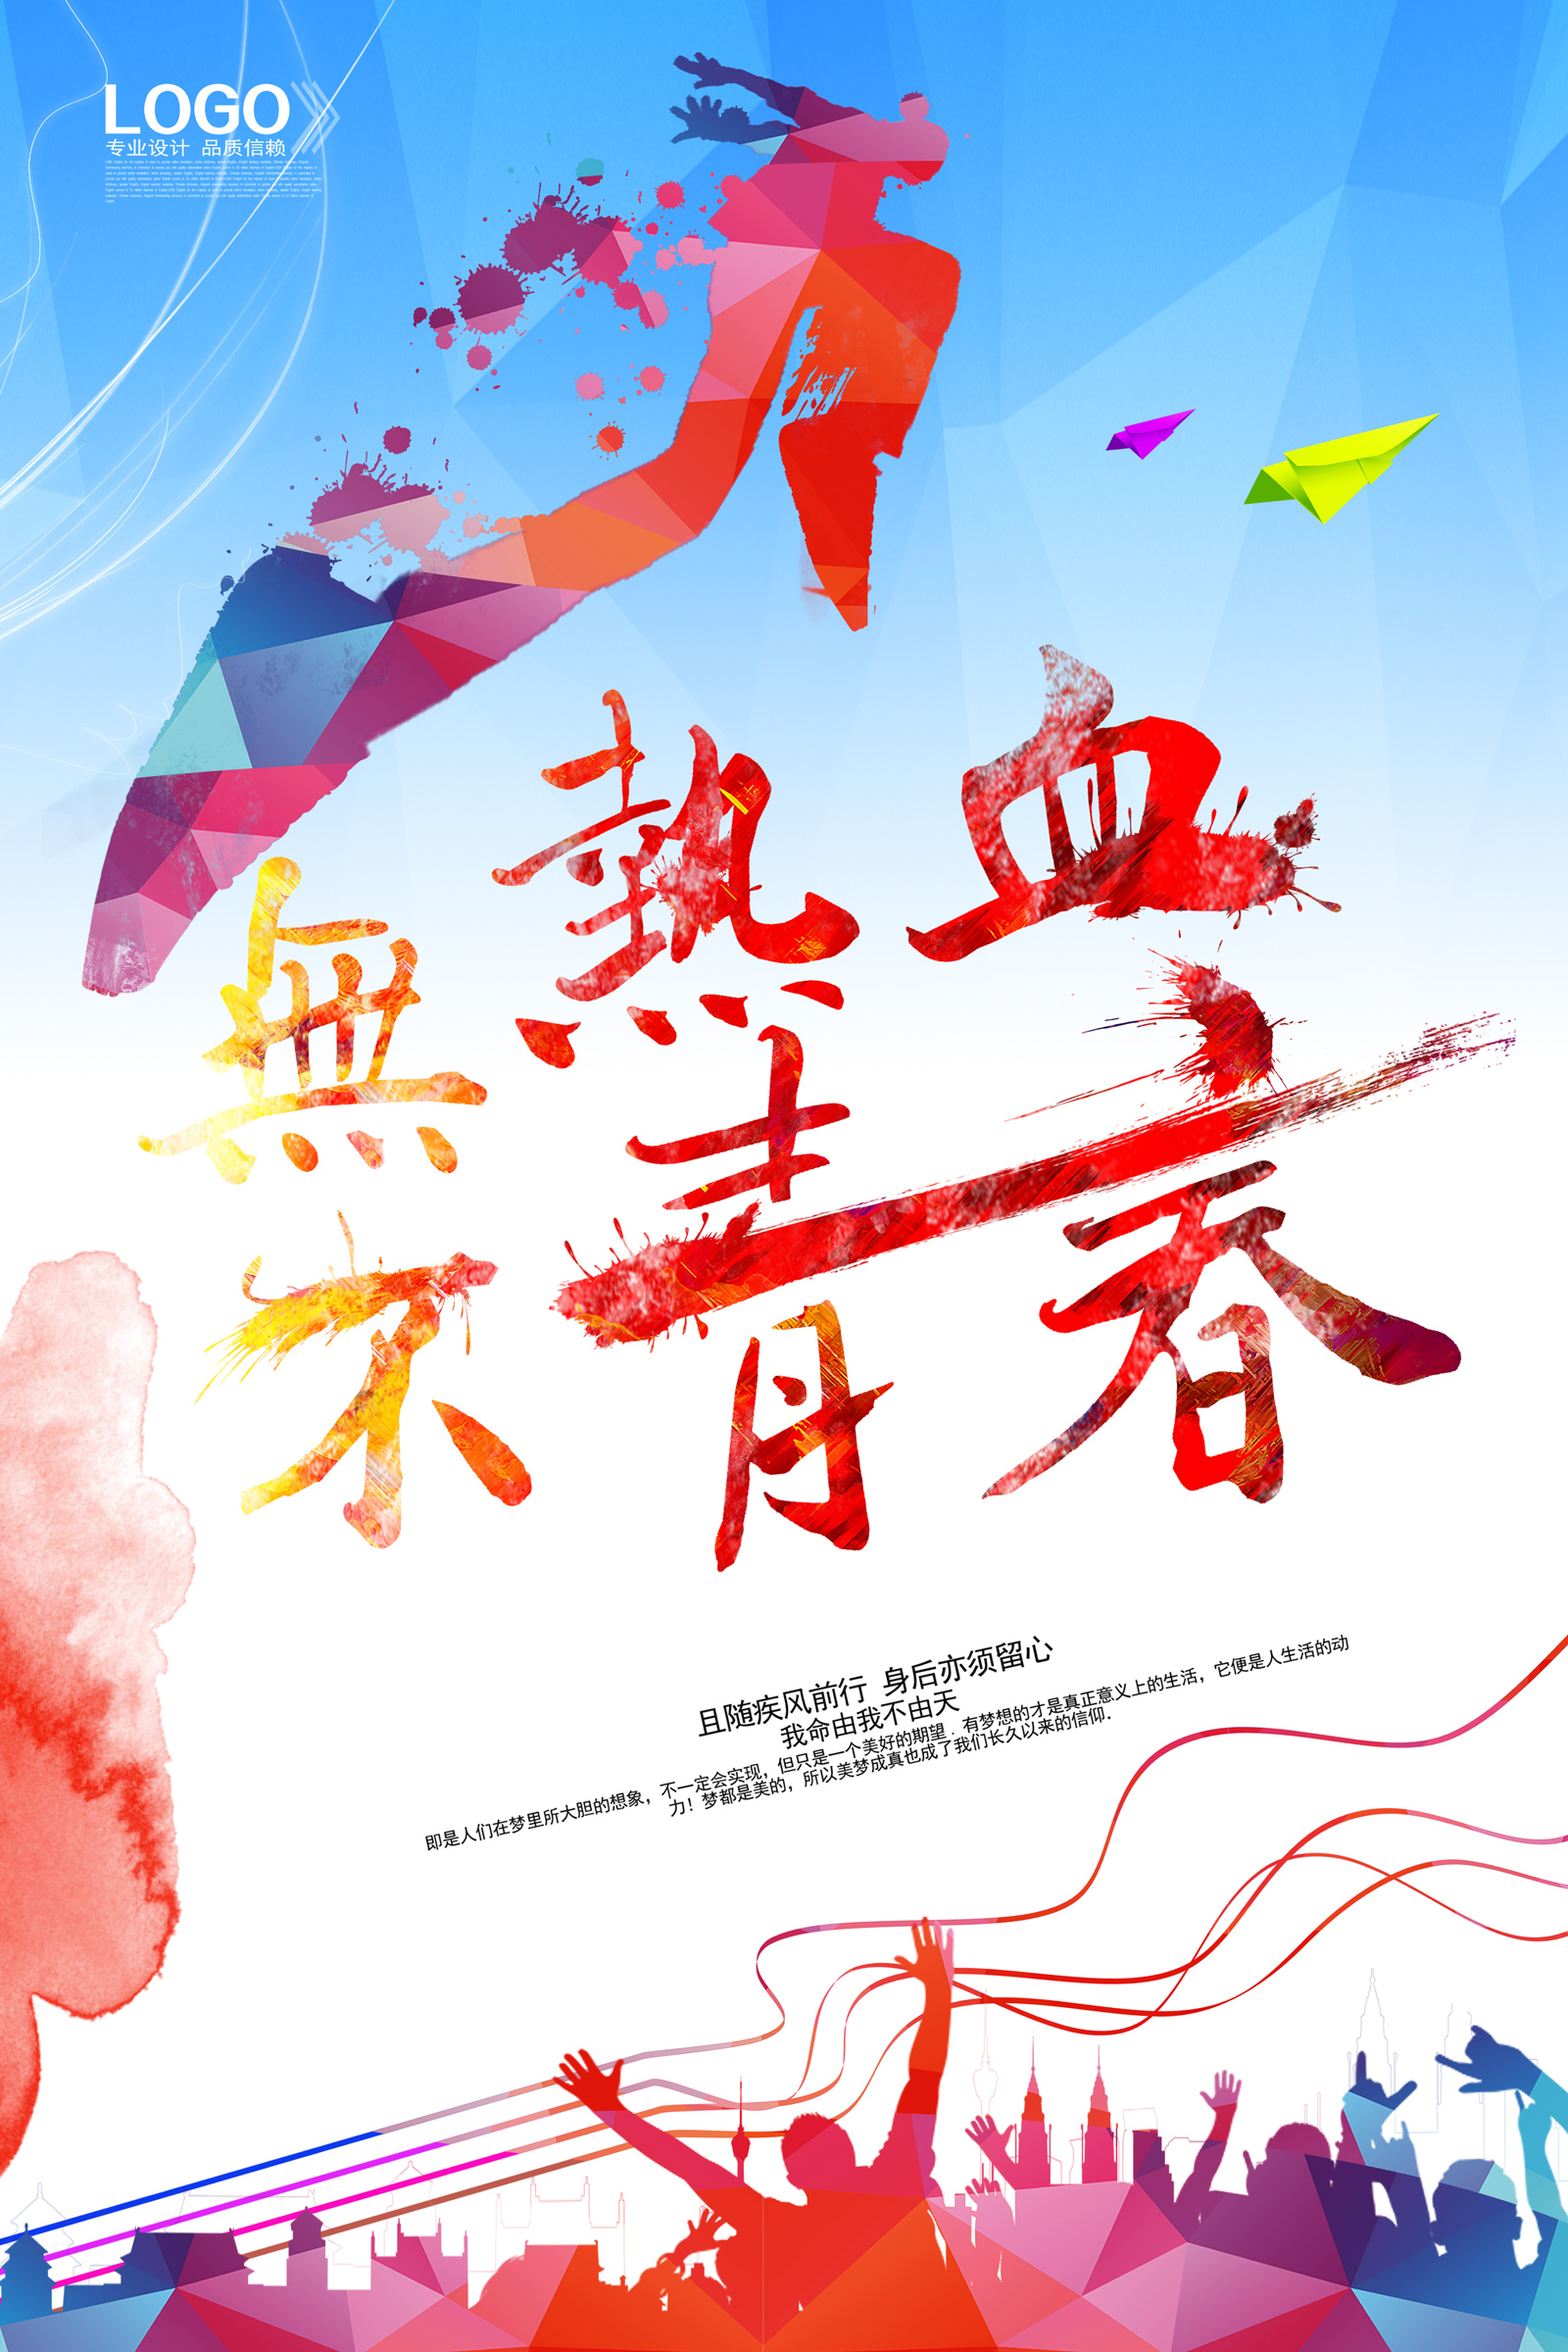 Blood youth - China PSD File Free Download